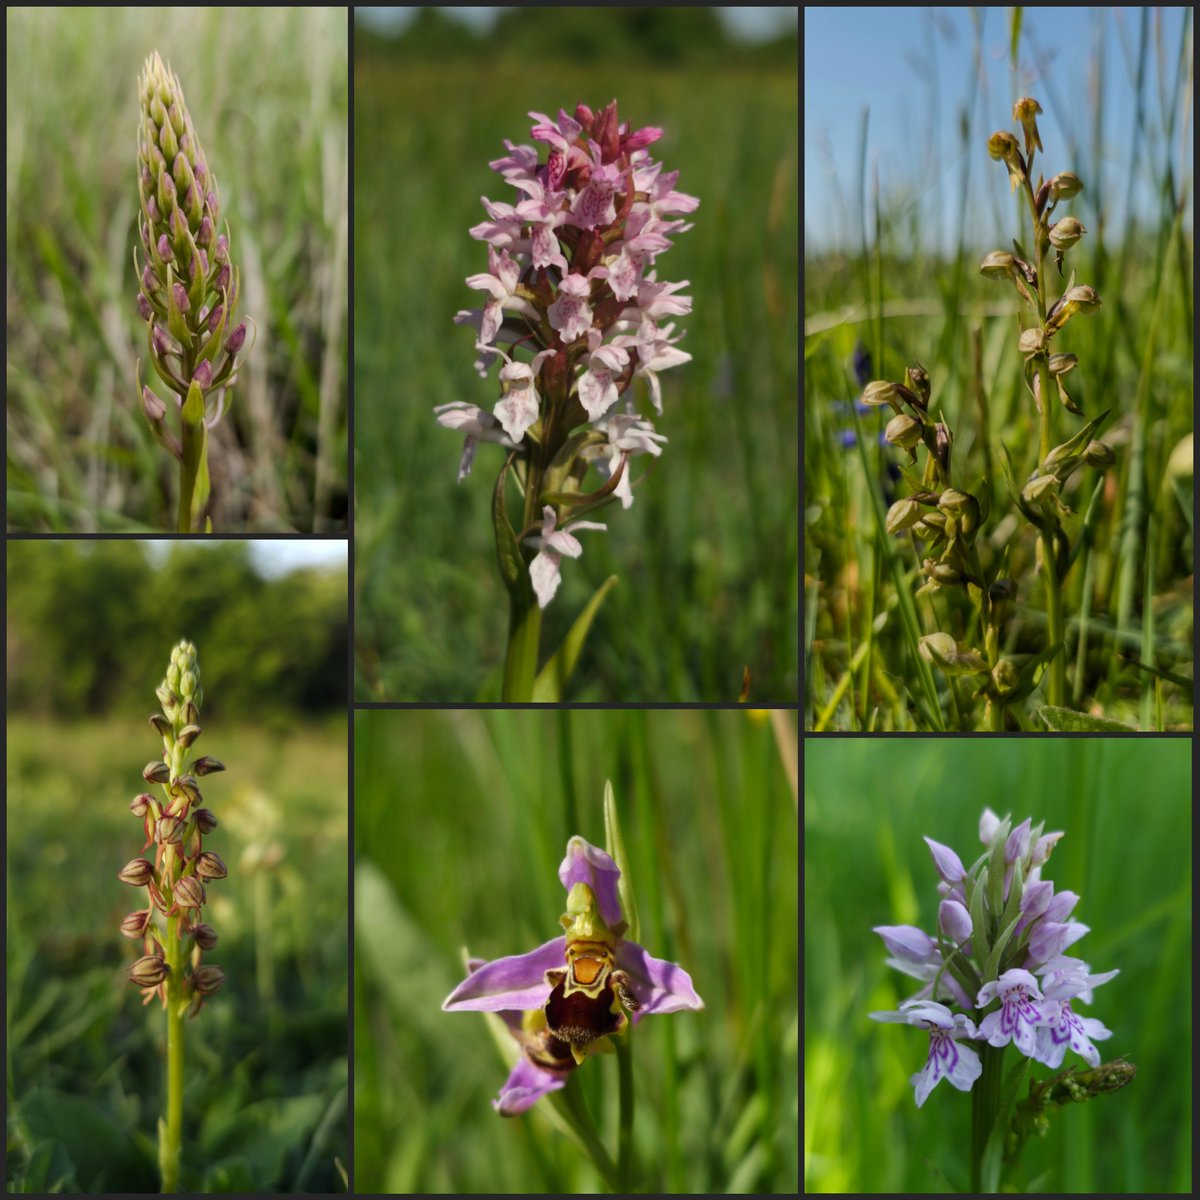 Last week's Cambridgeshire orchids for #WildFlowerHour...
Emerging Chalk Fragrant, Early Marsh, Frogs, Common Spotted, Bee and Man.
@BSBIbotany @ukorchids @wildflower_hour